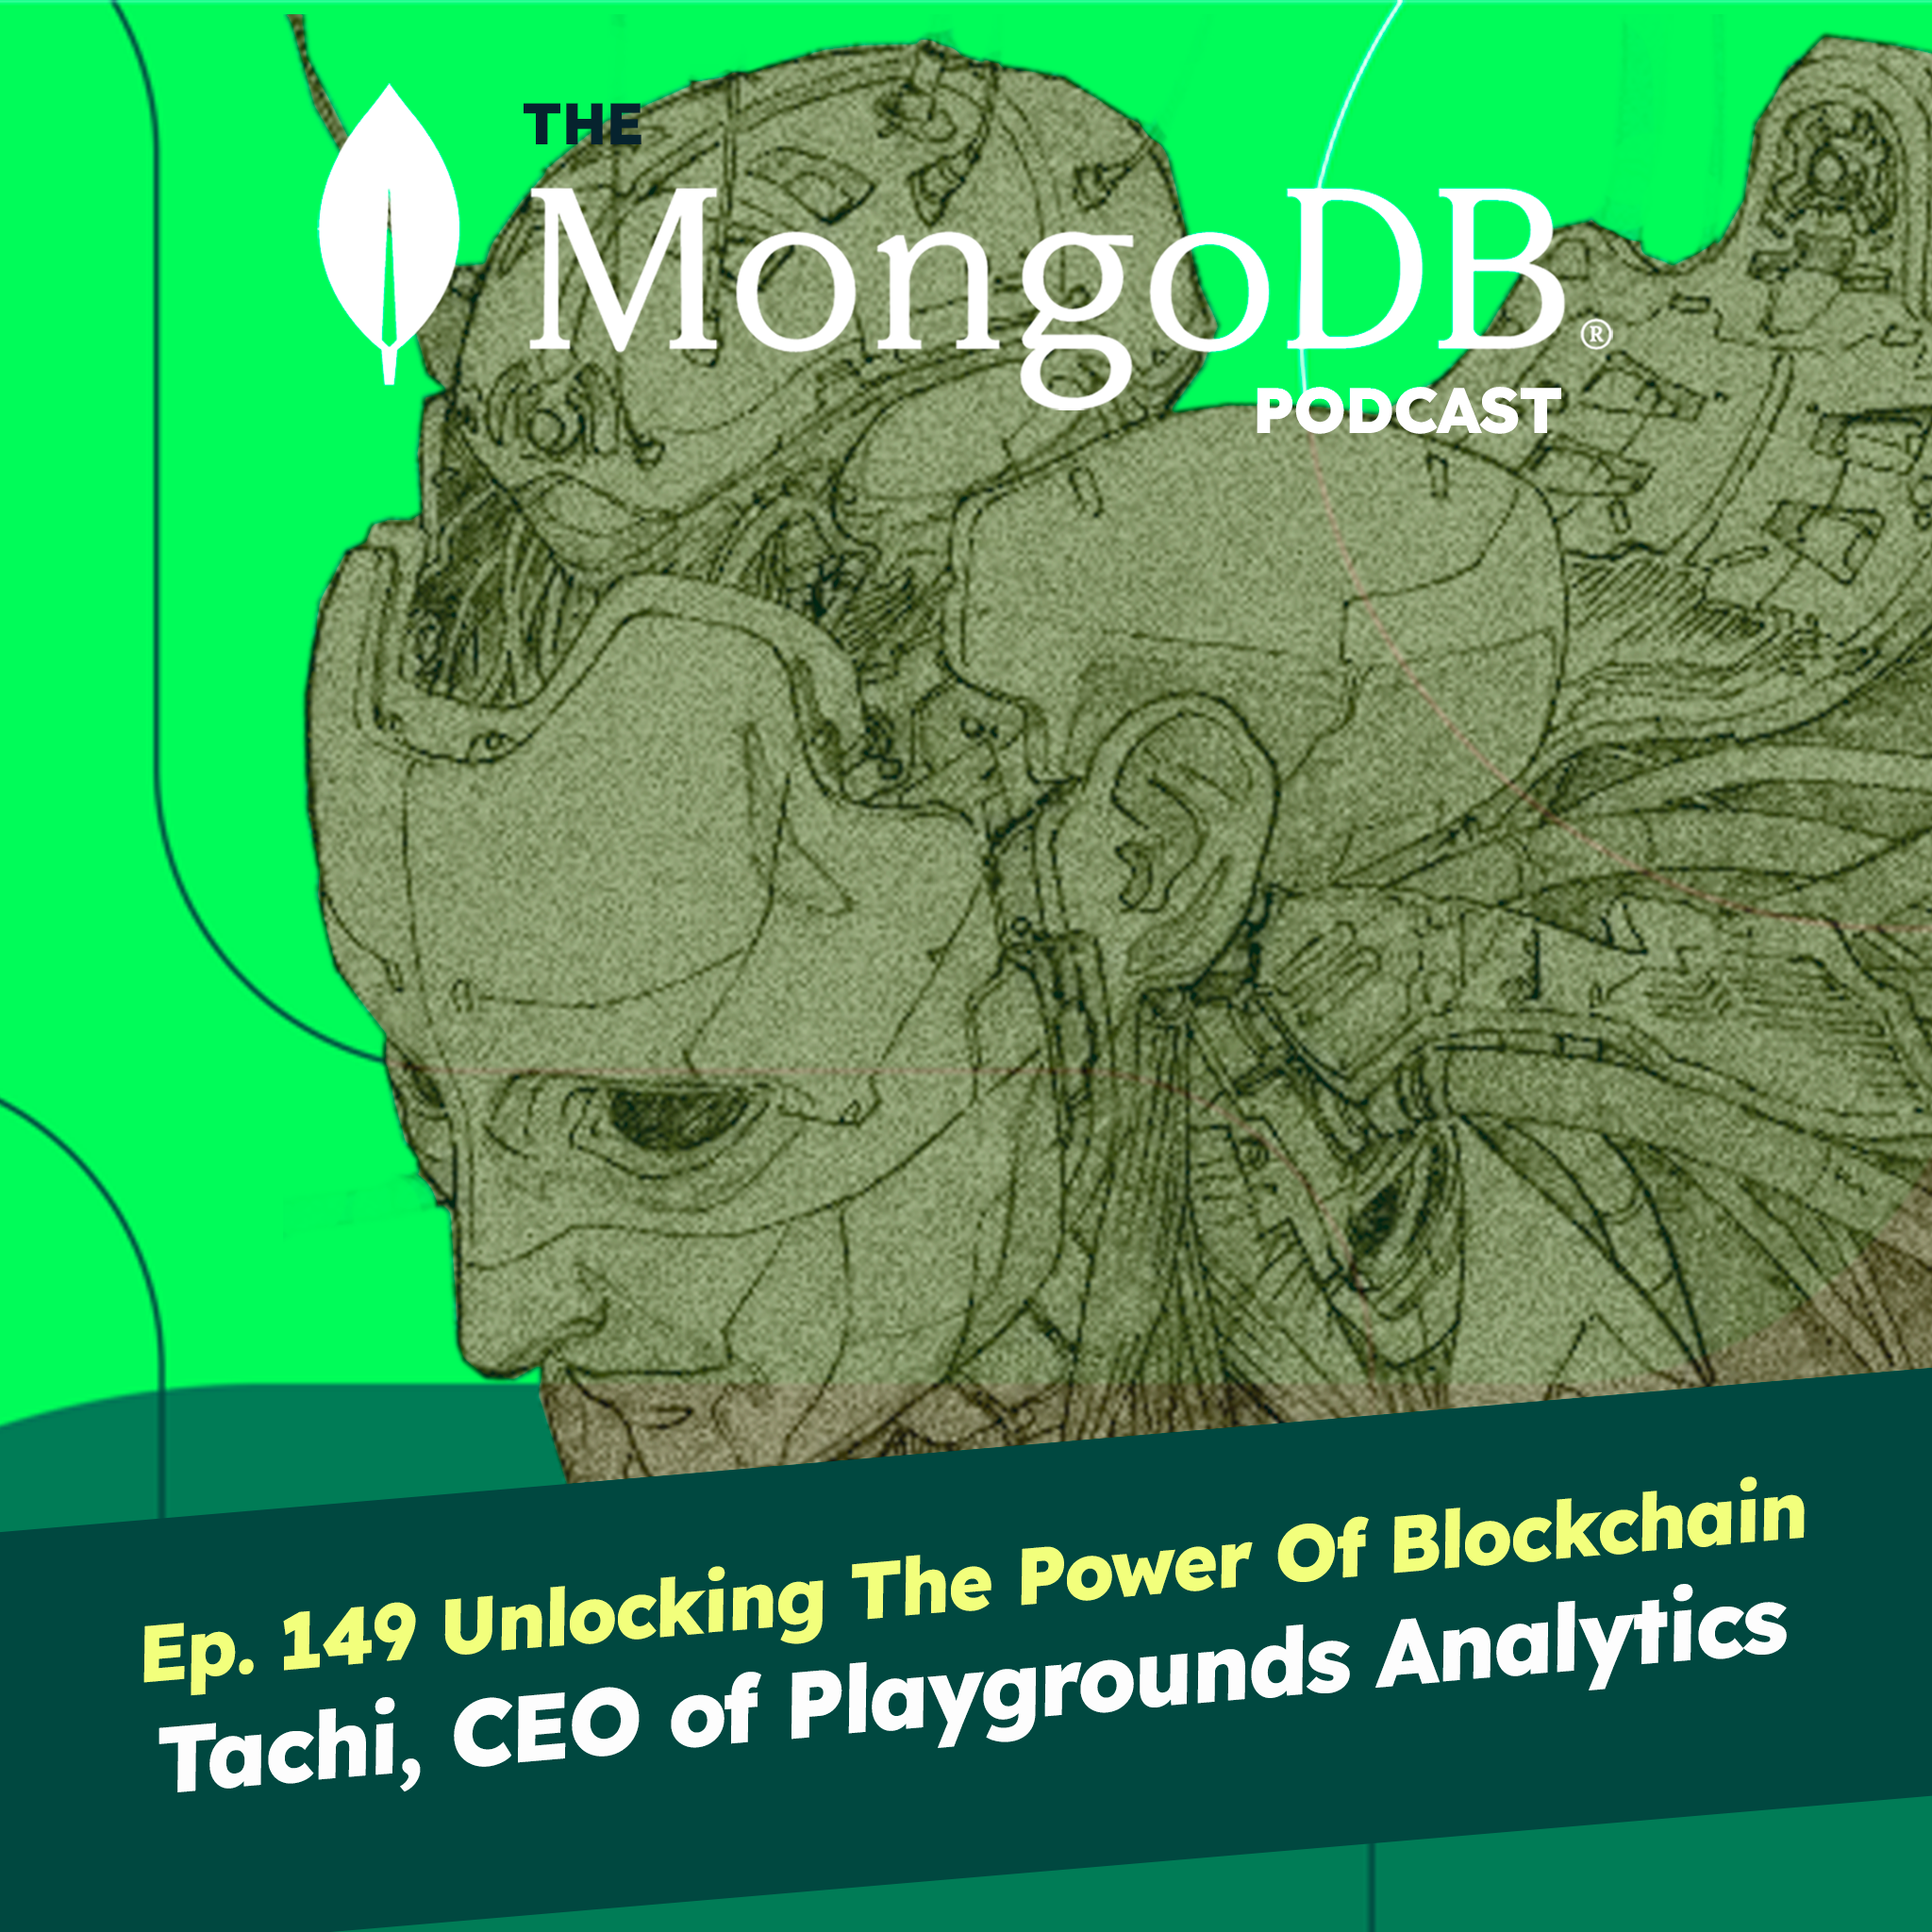 Ep 149 Unlocking the Power of Blockchain for Business Analytics with Playgrounds CEO Tachi